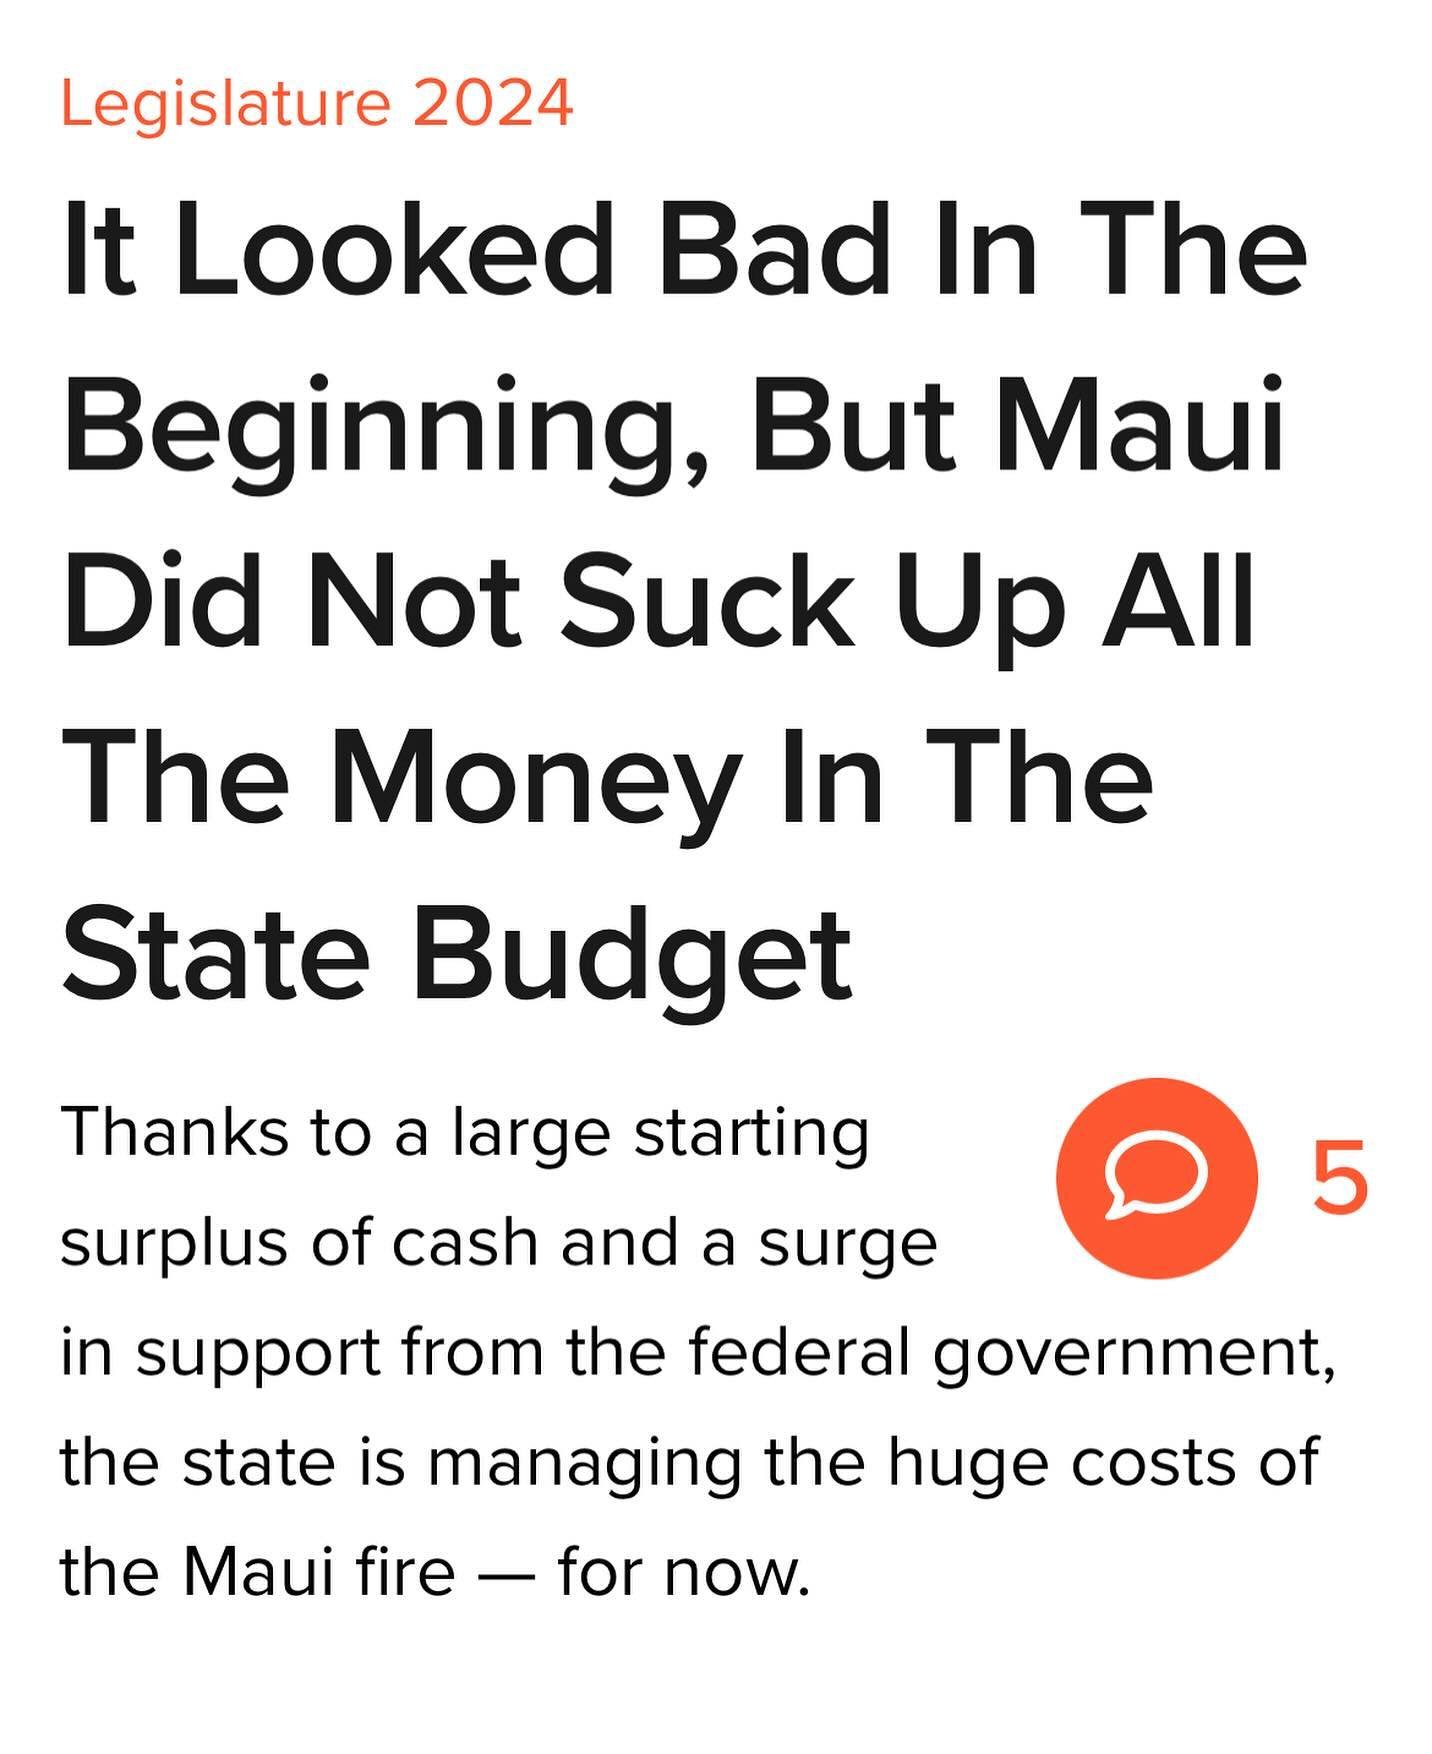 &ldquo;Nonprofit agencies and community organizations were warned early in the session there might not be any money available for state grants to fund their operations or construction projects because of the cost of Maui recovery efforts.&rdquo;

&ld